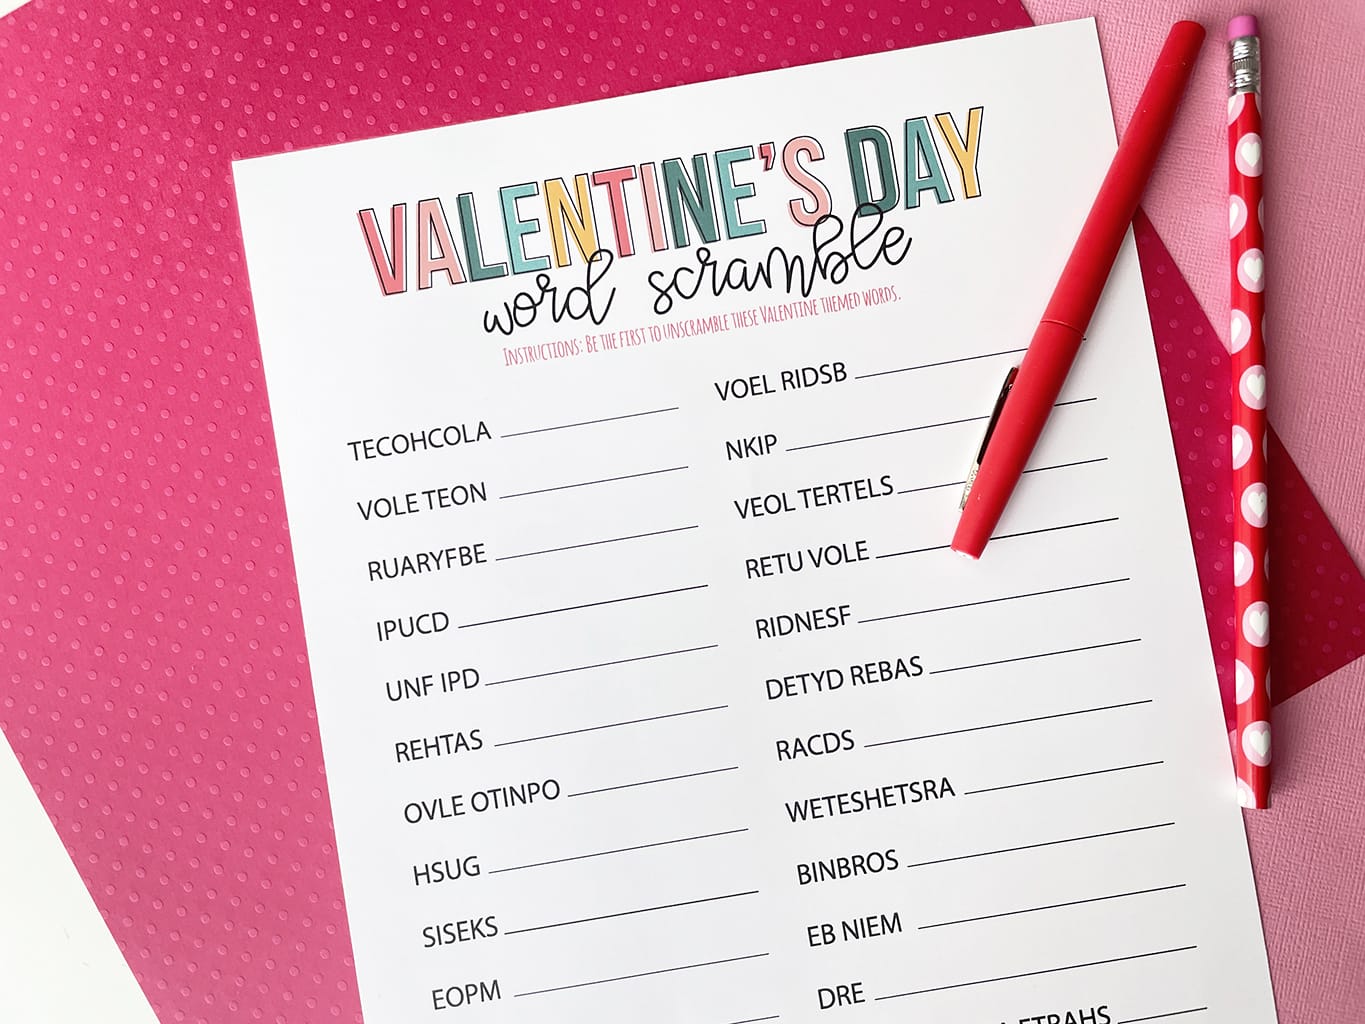 Valentines Day Word Scramble Printable Game printed out and placed on a dark pink and light pink paper backdrop. With a red fineline marker and a Valentine pencil.